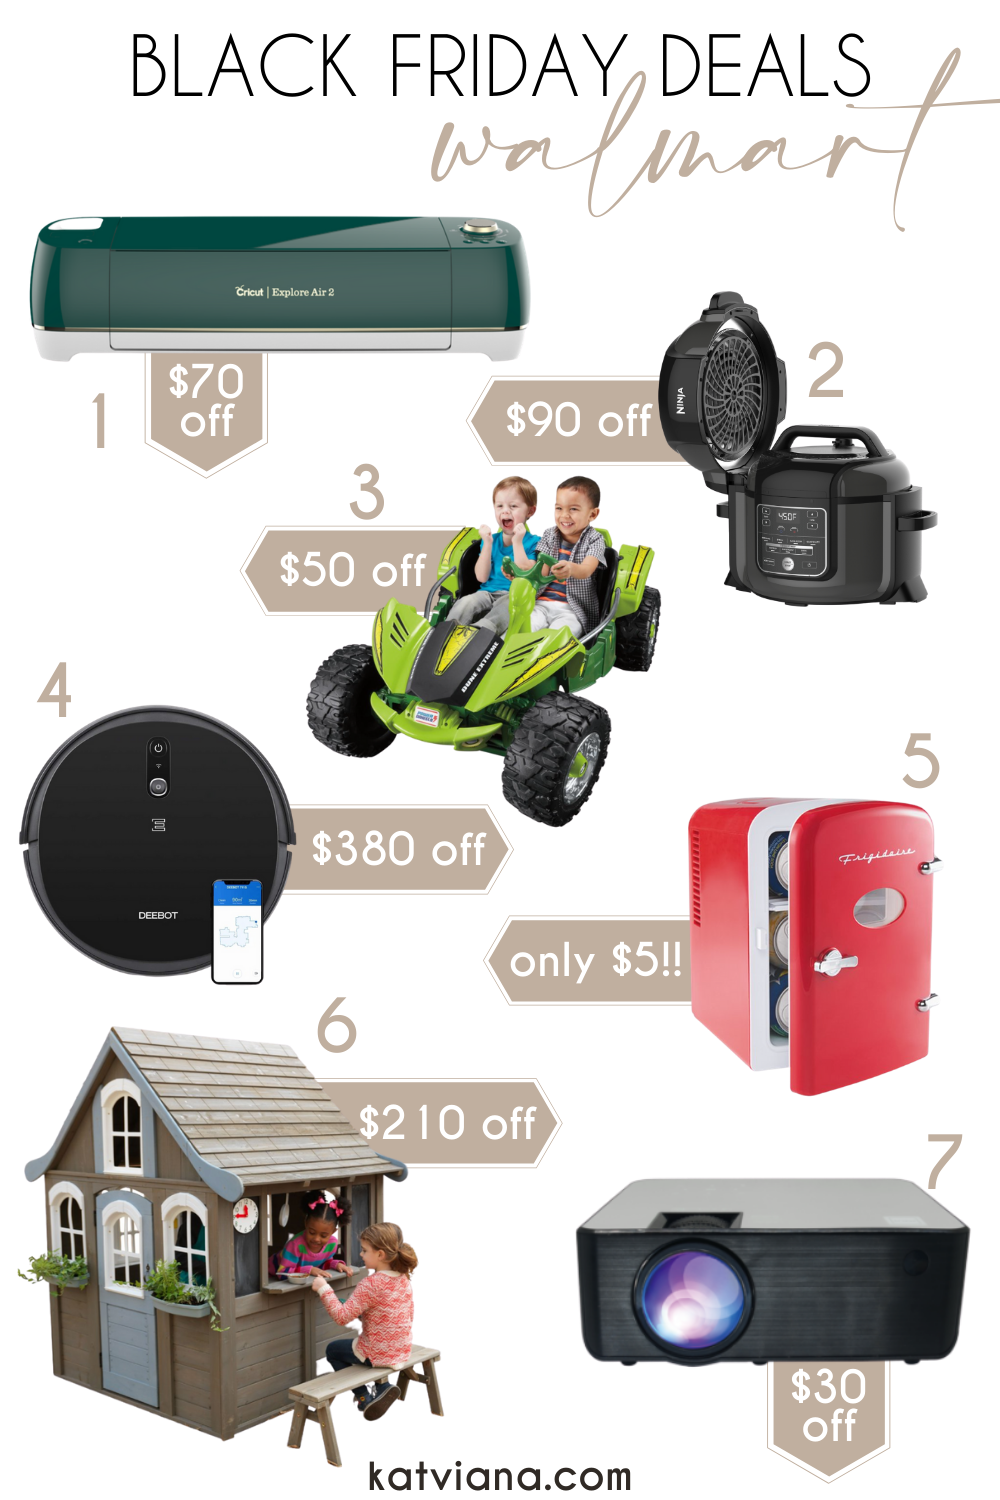 The best Black Friday deals from Walmart: Cricut machine for $70 off, robot vacuum for $380 off, mini 6-can fridge/skincare fridge for only $5 and child playhouse for $210 off! | Kat Viana